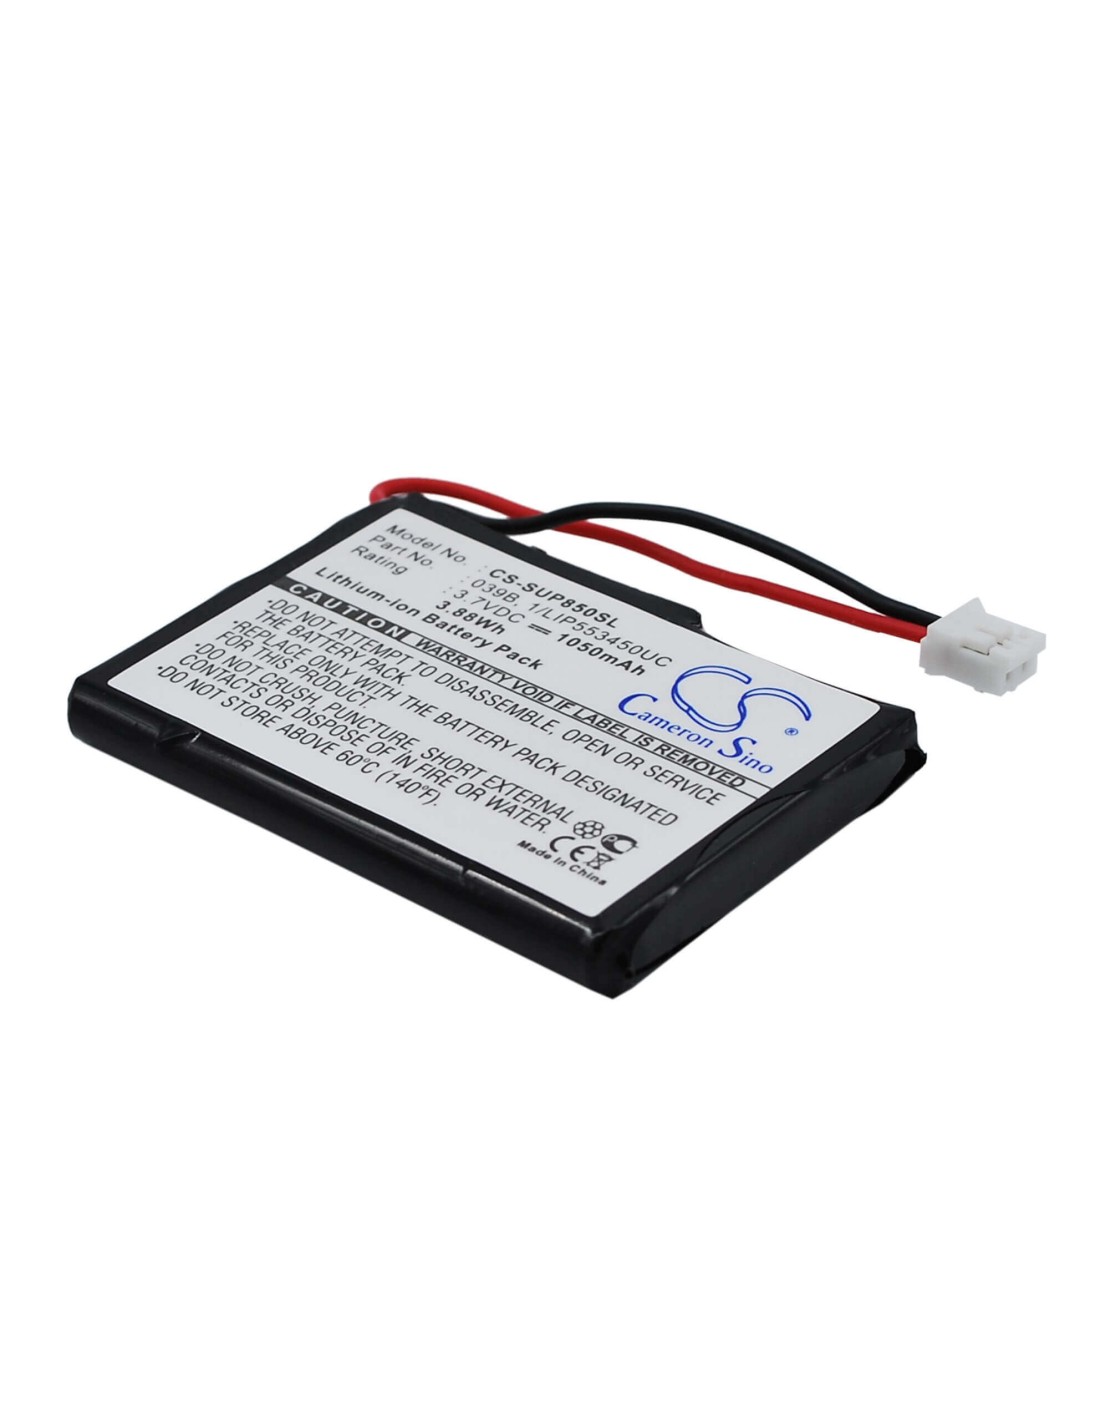 Battery for Microtracker 01-065-0624-0, 01-065-0625-0, Gprs 3.7V, 1050mAh - 3.89Wh